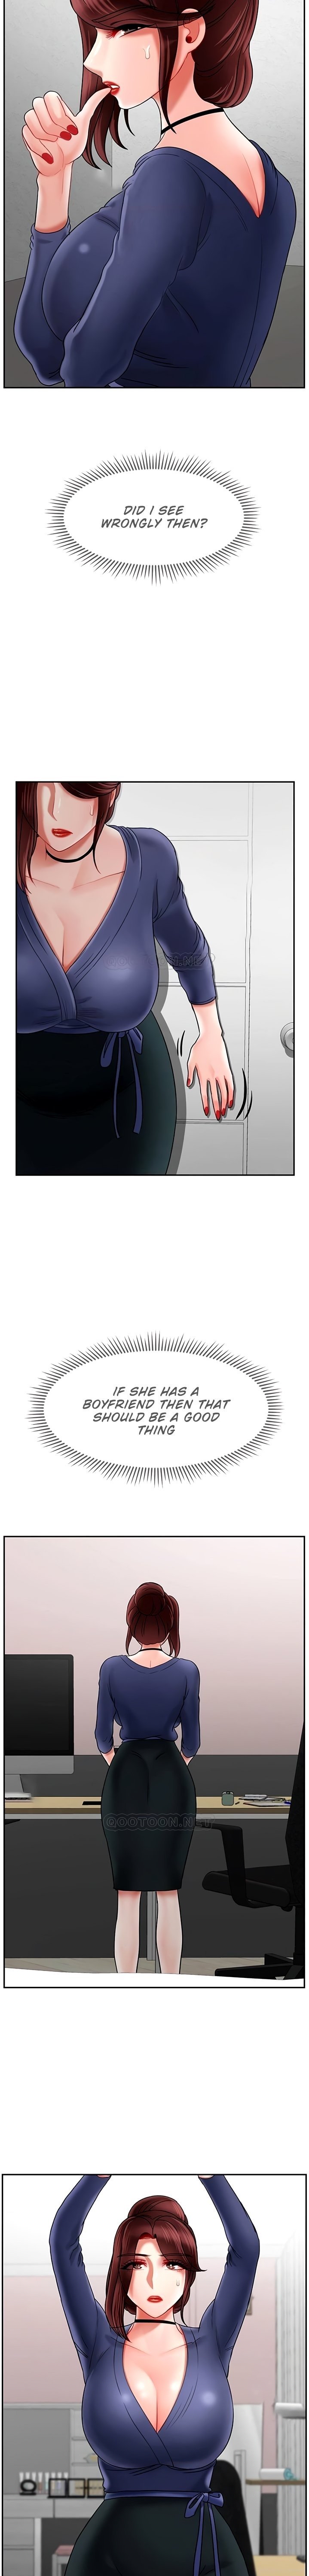 physical-classroom-chap-36-11